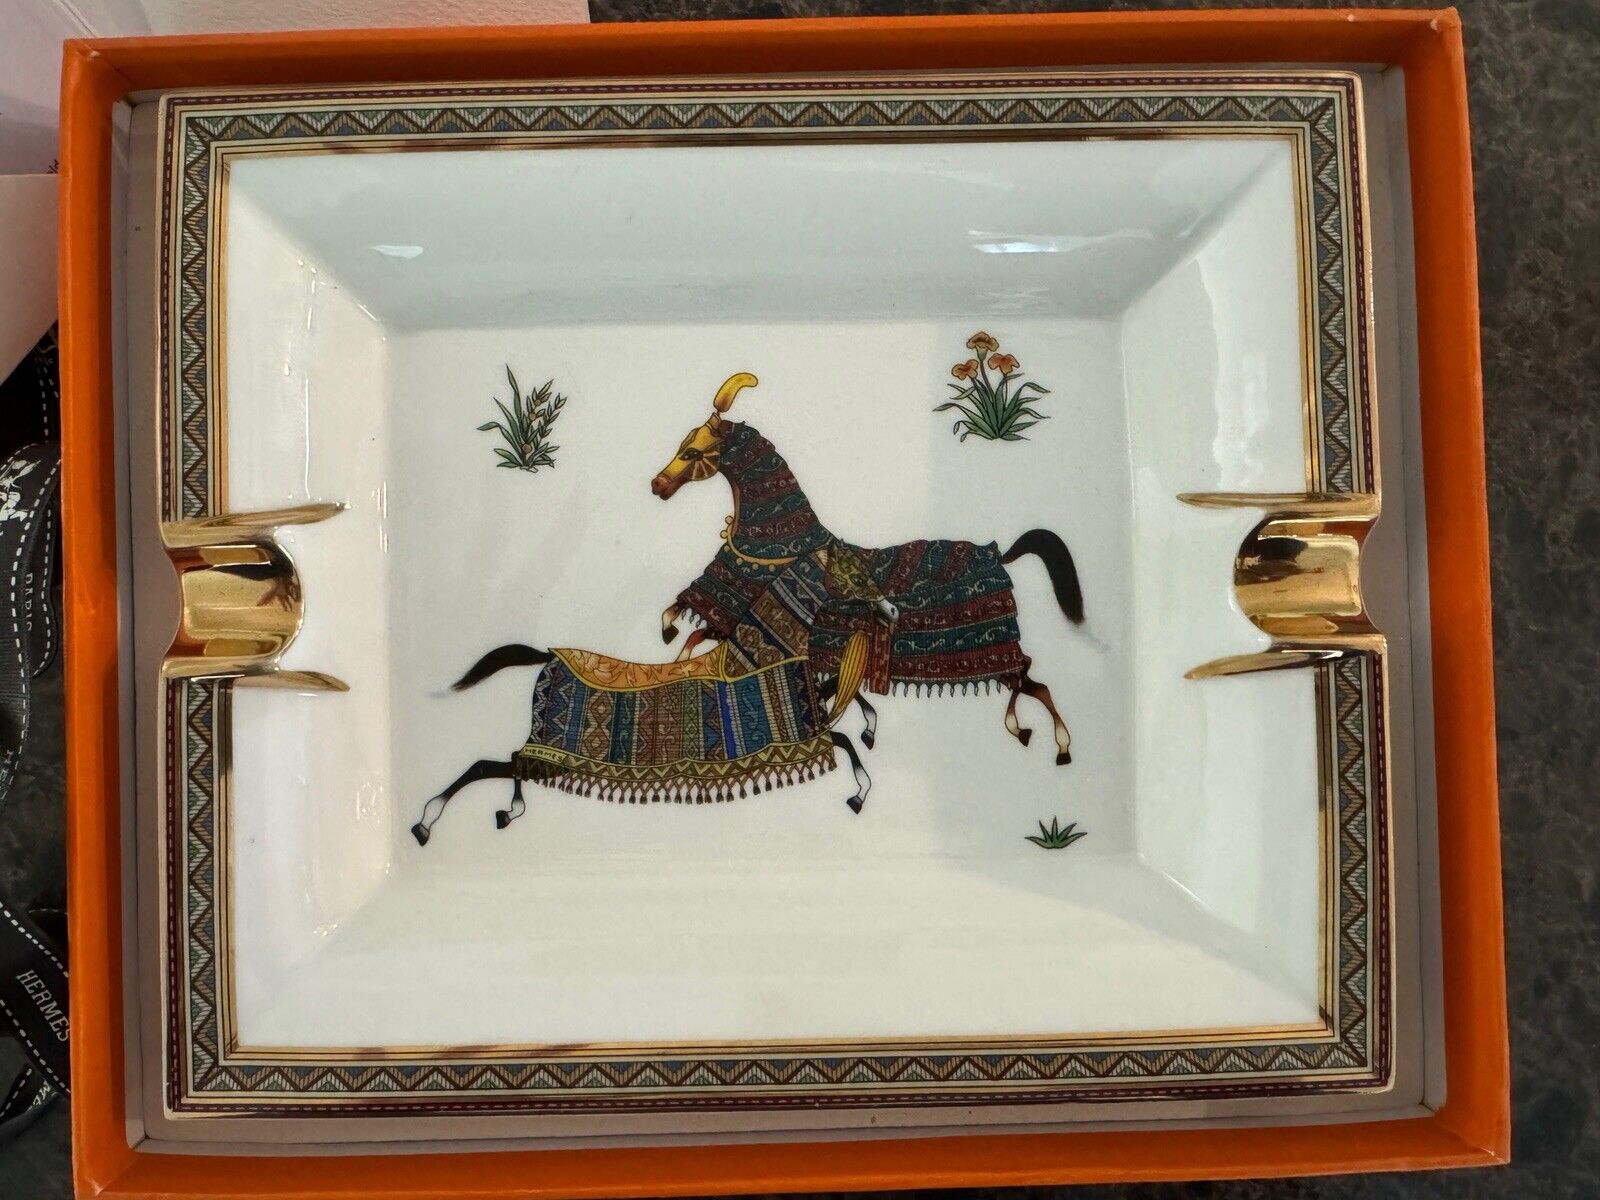 HERMES Large CIGAR ASHTRAY  - Cheval d'Orient - WITH BOX- MADE IN FRANCE 